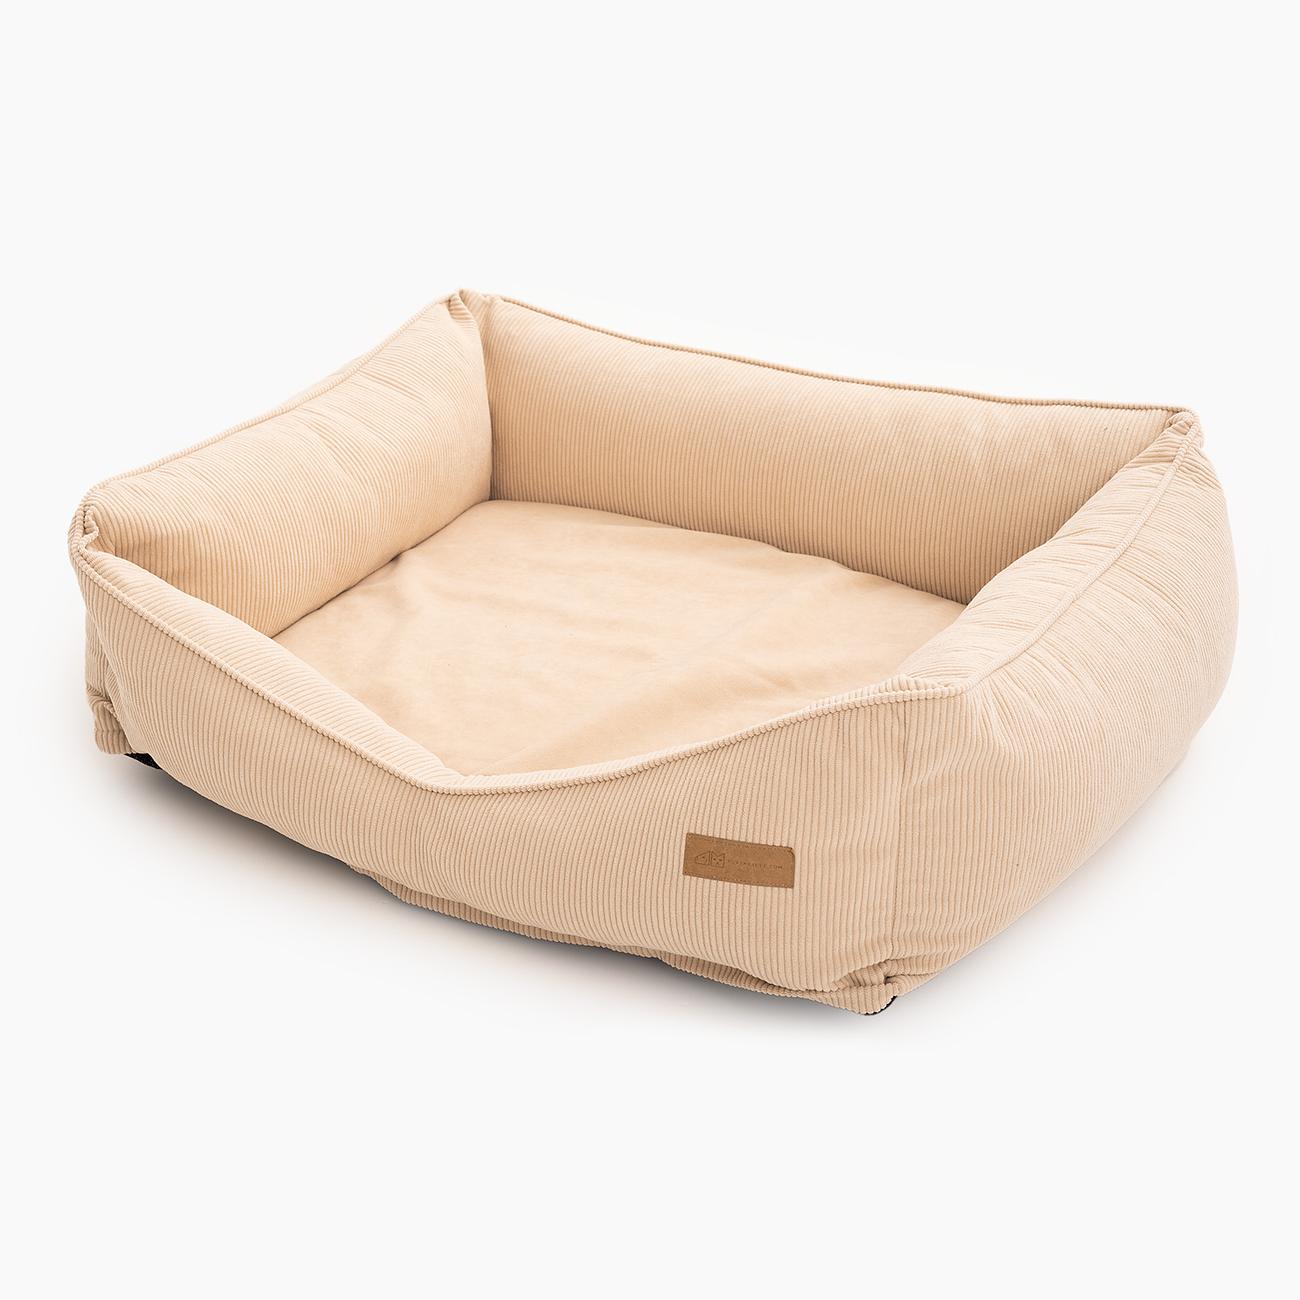 Orthopedic corduroy couch ''Dog on the beach''